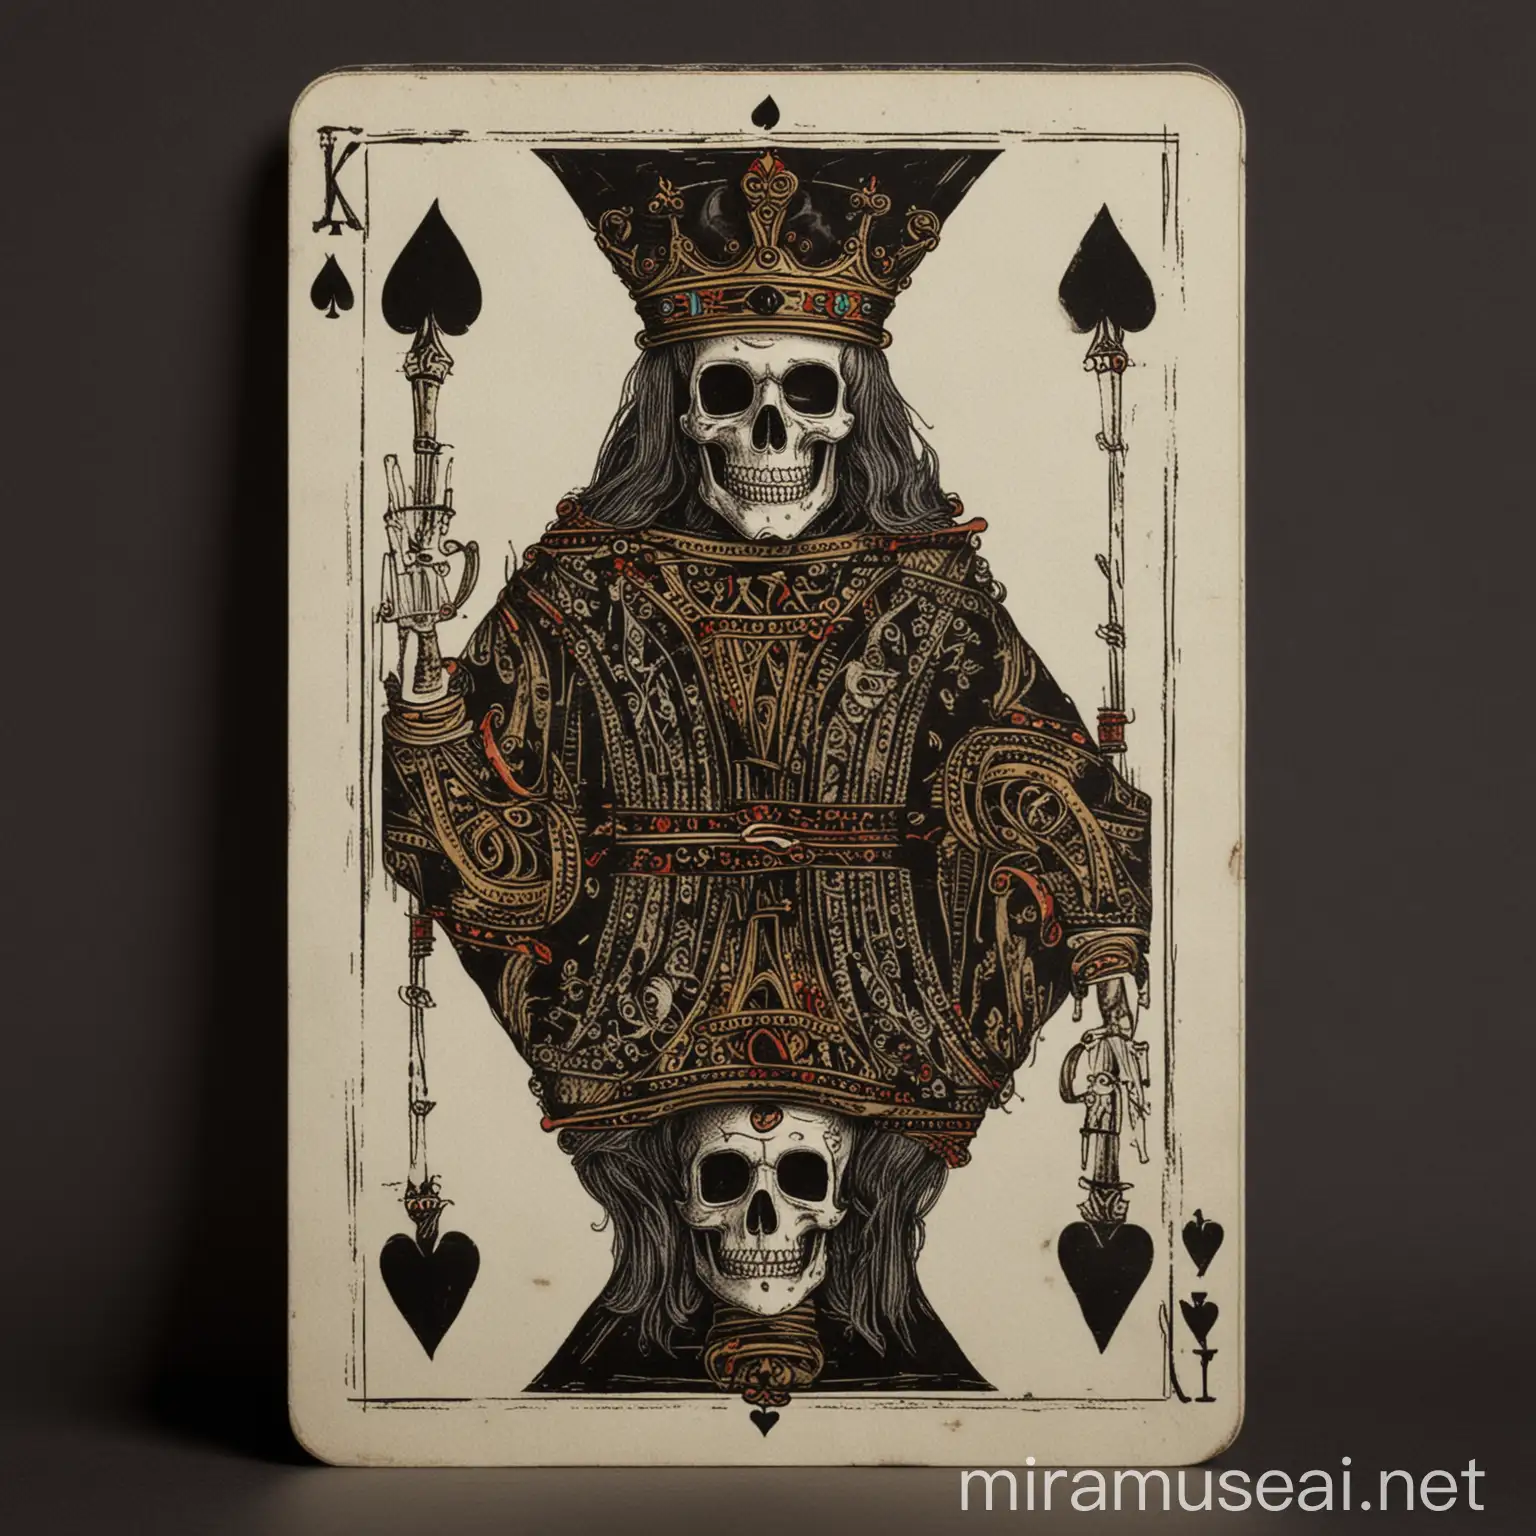 a playing card of the king of spades as the death king